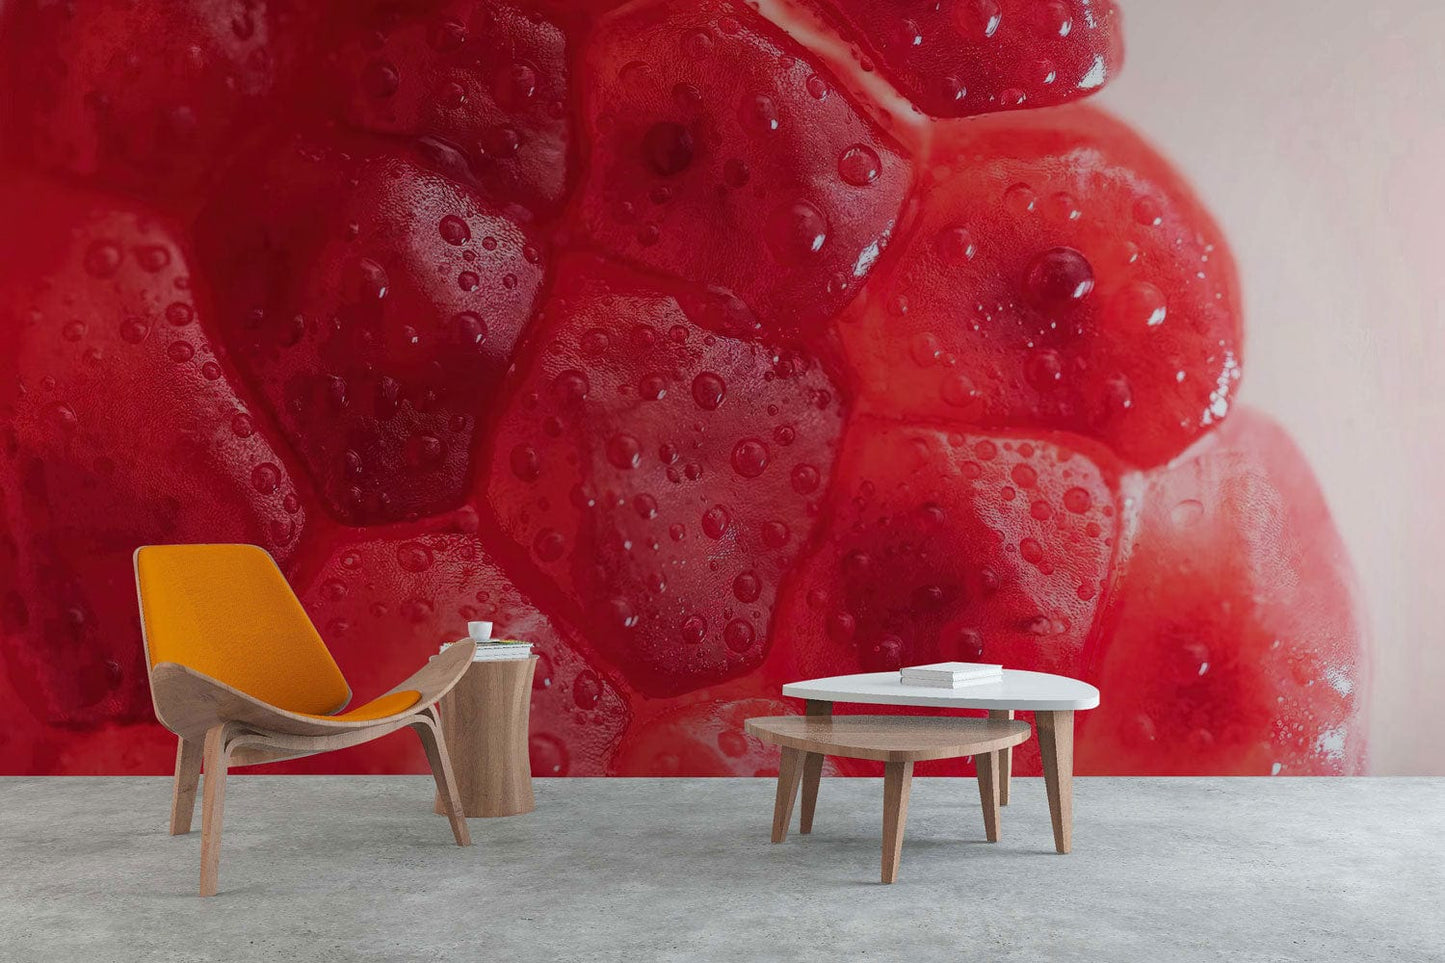 Crystalline Pomegranate Wallpaper Mural for Use as Decoration in Hallways